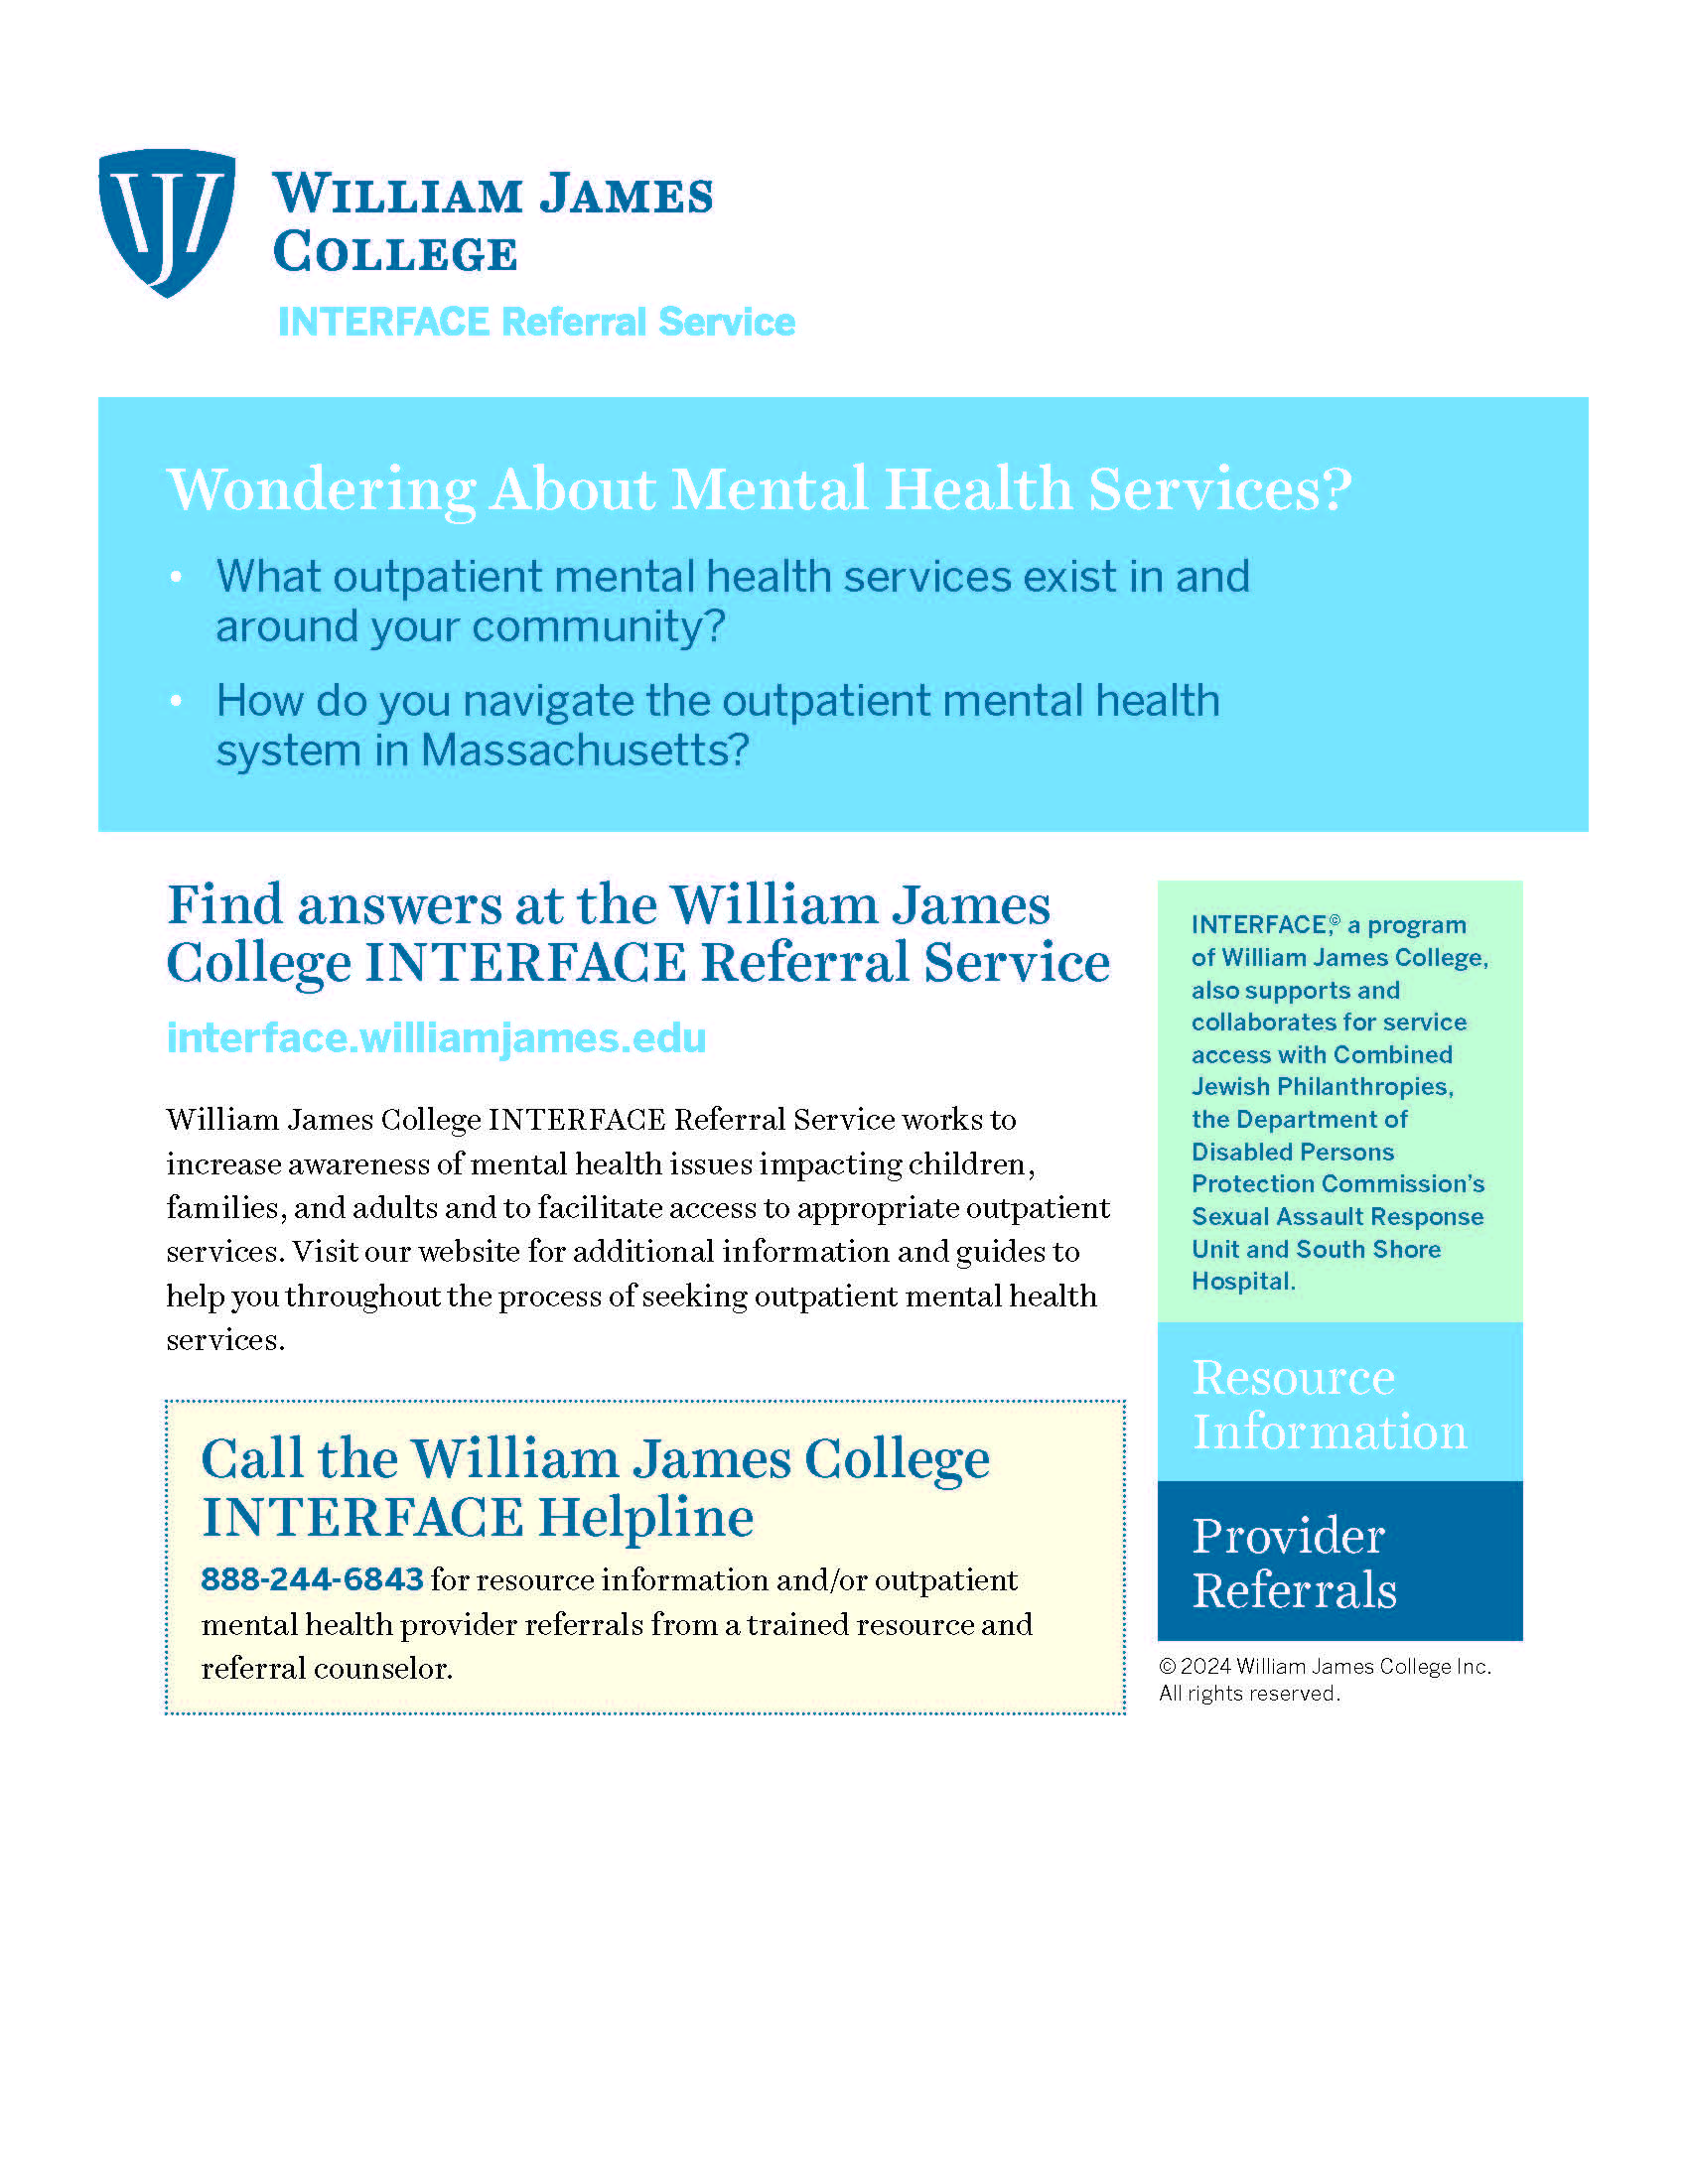 bright blue box at top informational flier